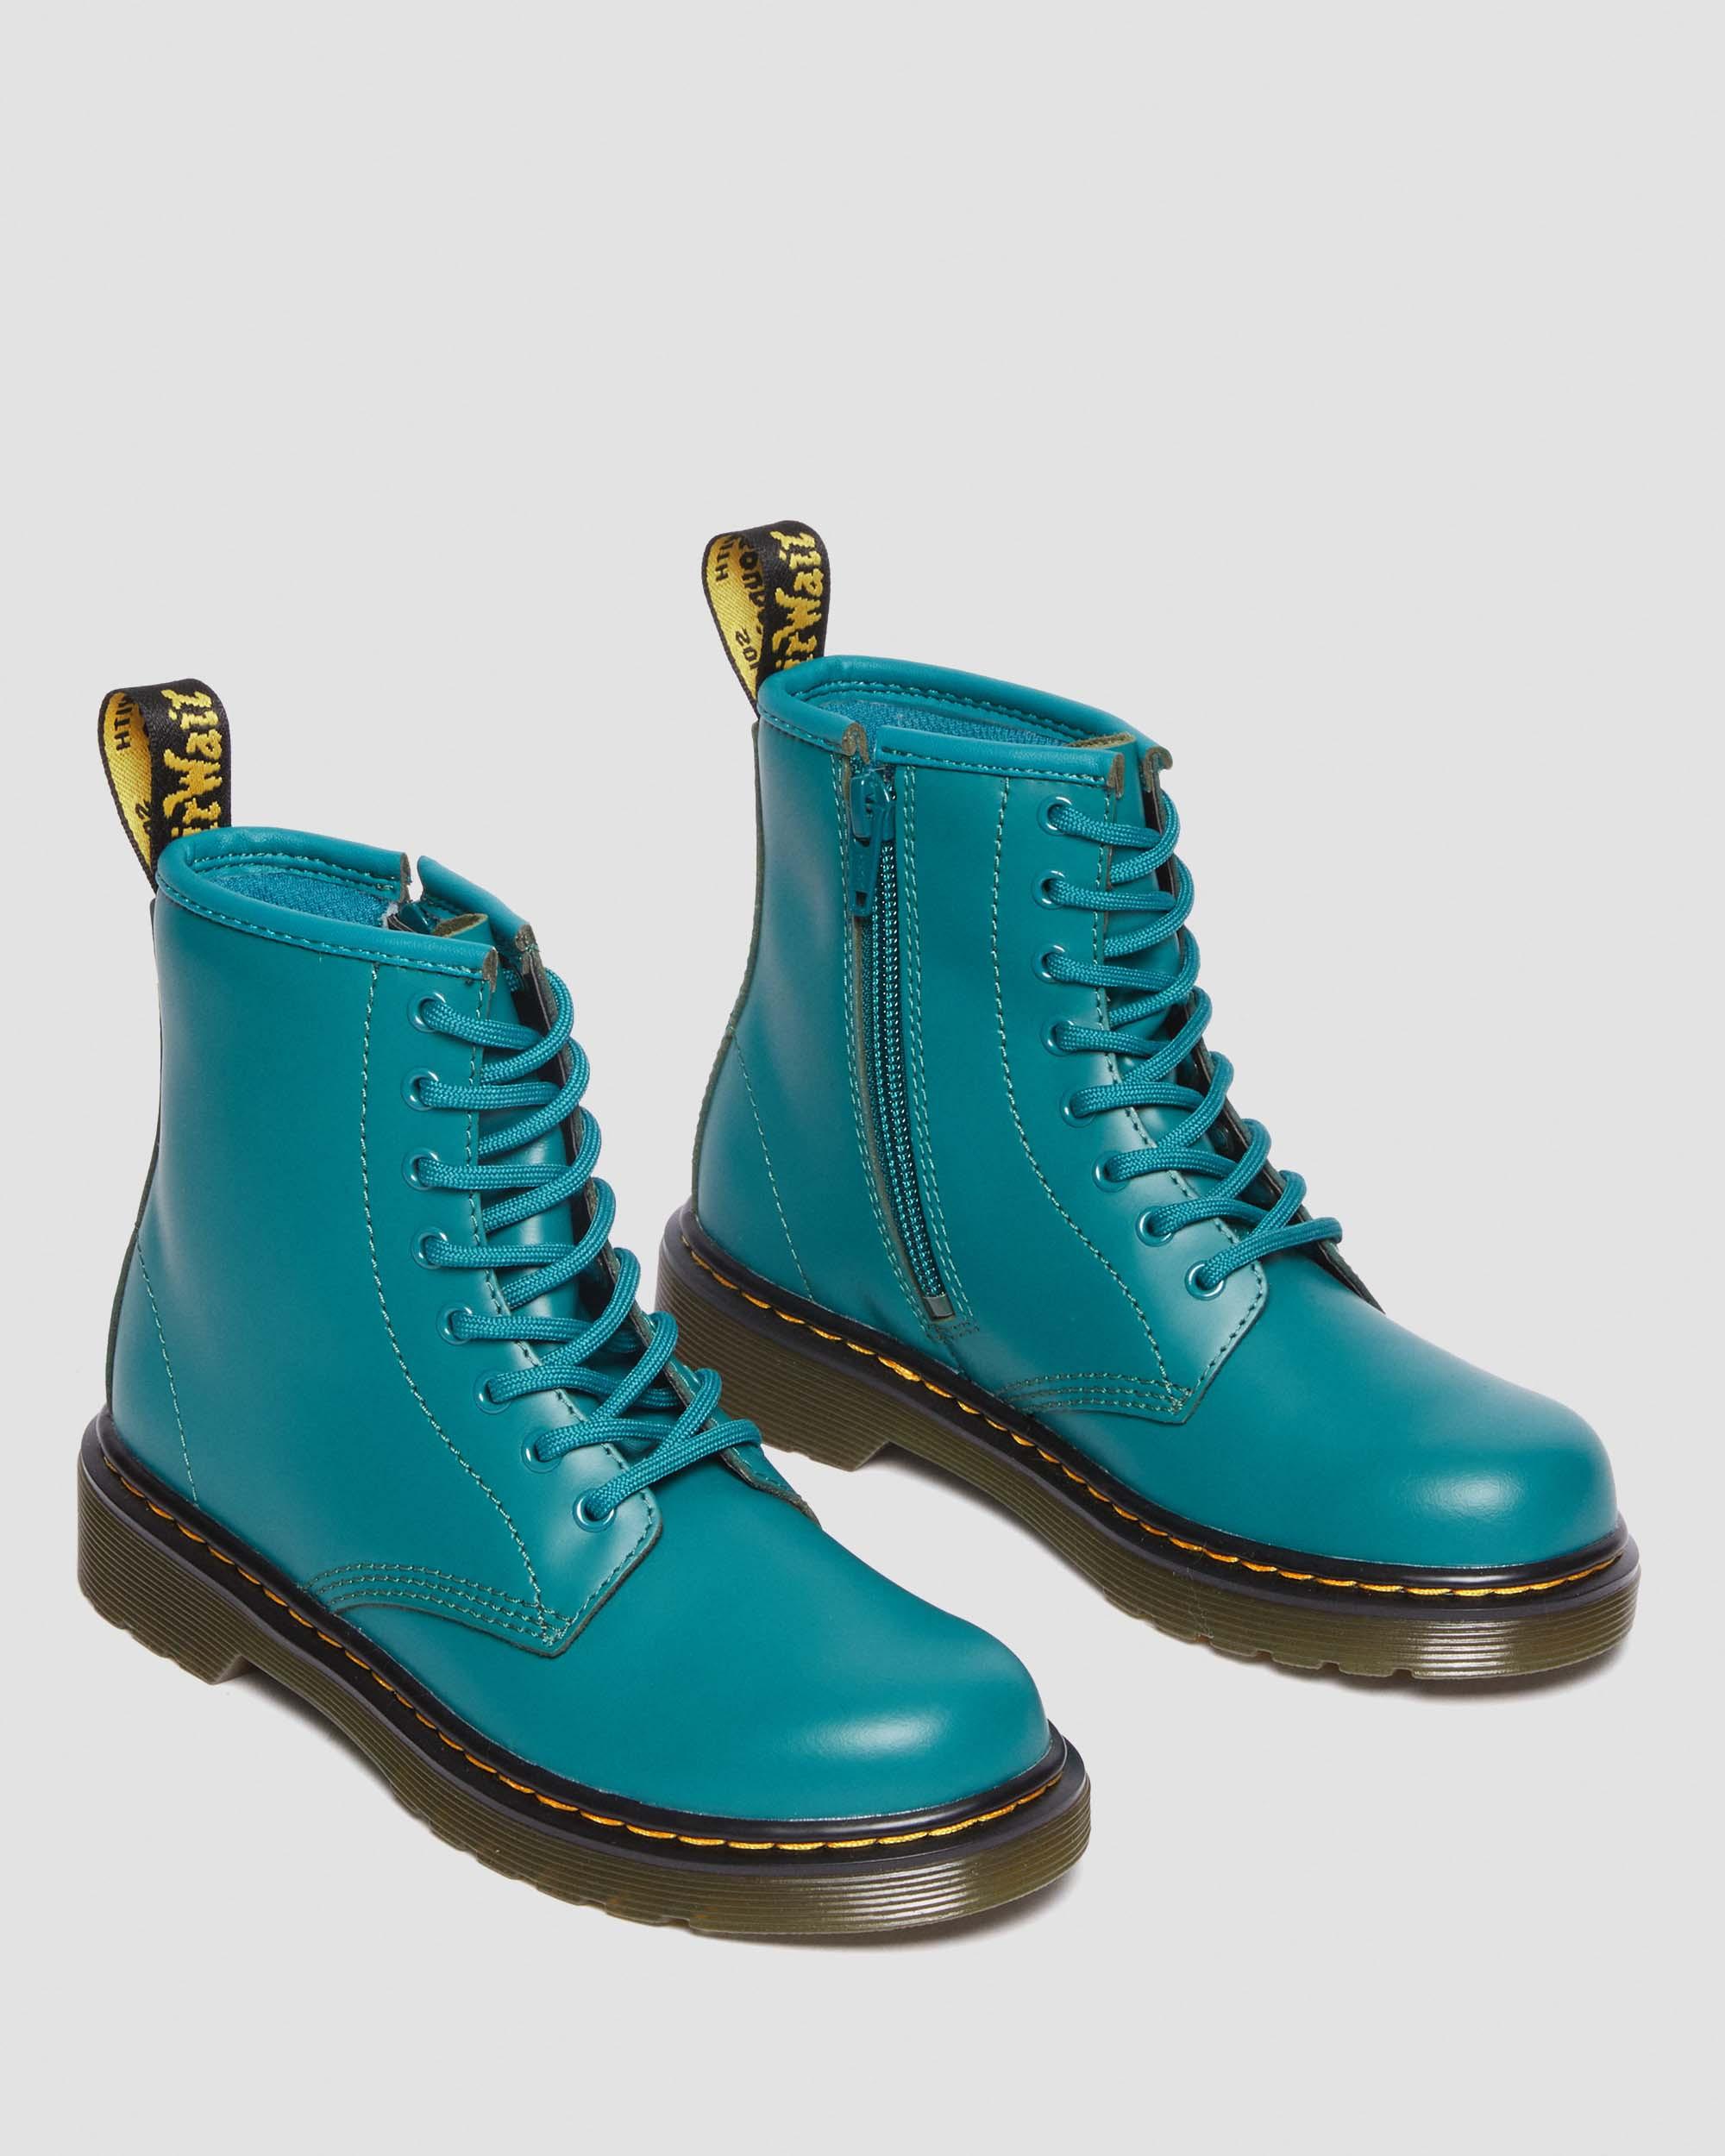 Junior 1460 Muted Leather Lace Up Boots in Teal Green | Dr. Martens